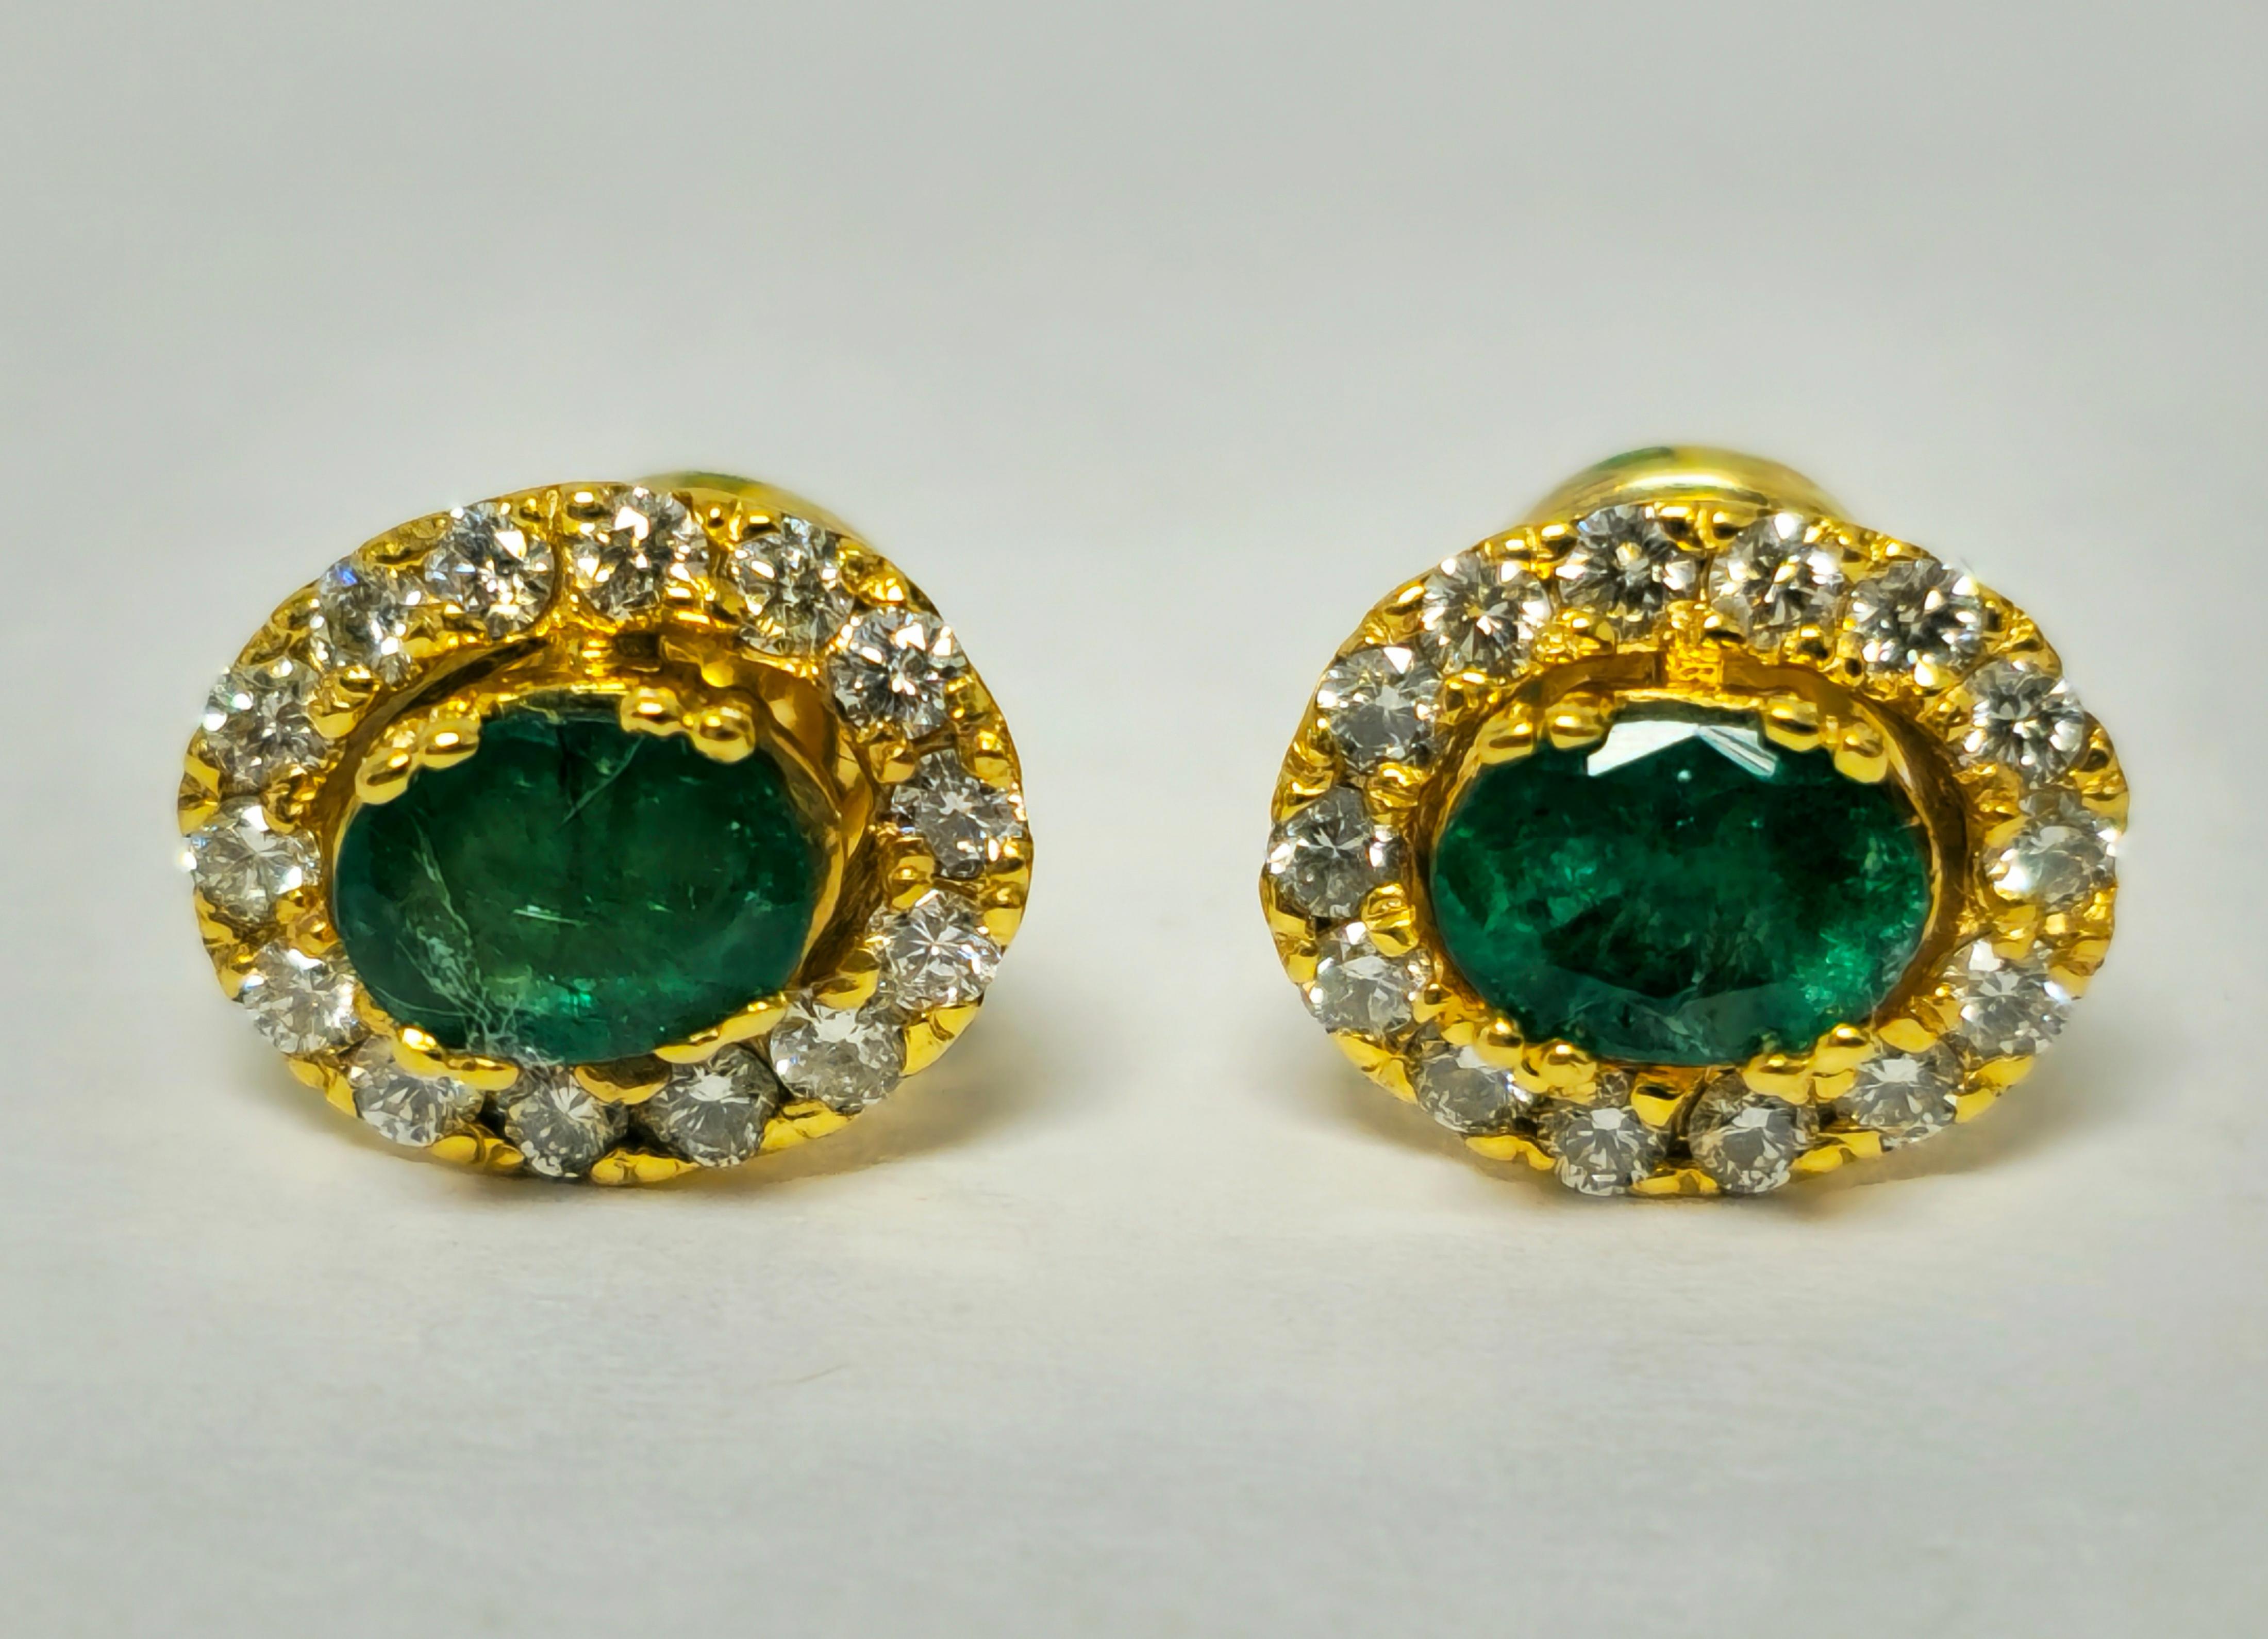 Contemporary Modern 2.50 Carat Emerald & Diamond Studs For Ladies.   For Sale